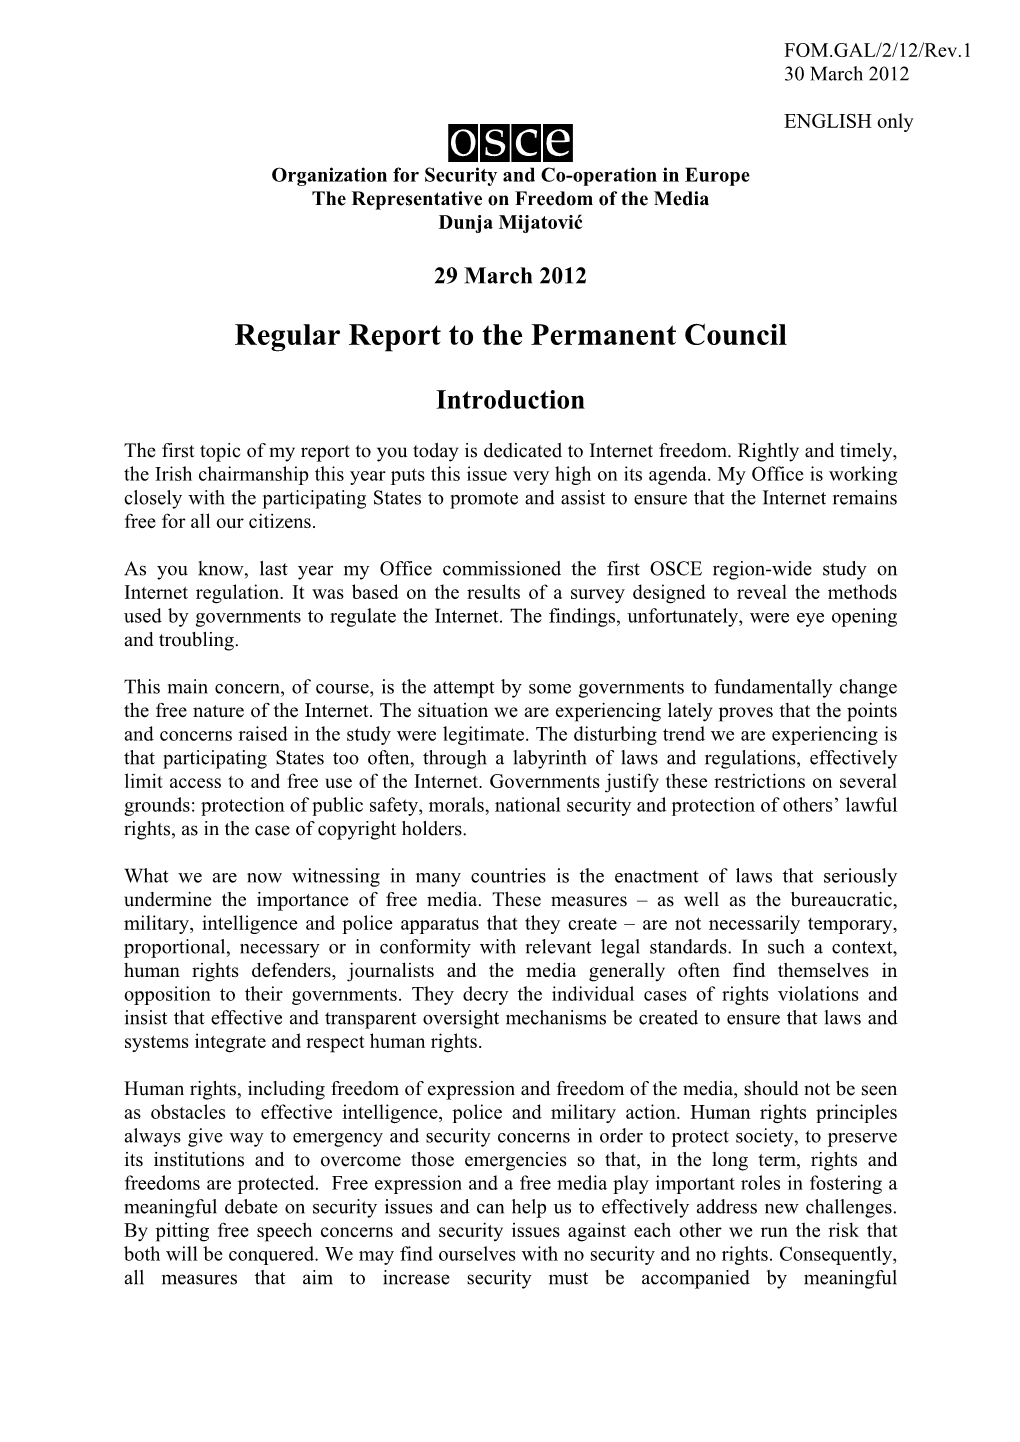 Regular Report to the Permanent Council